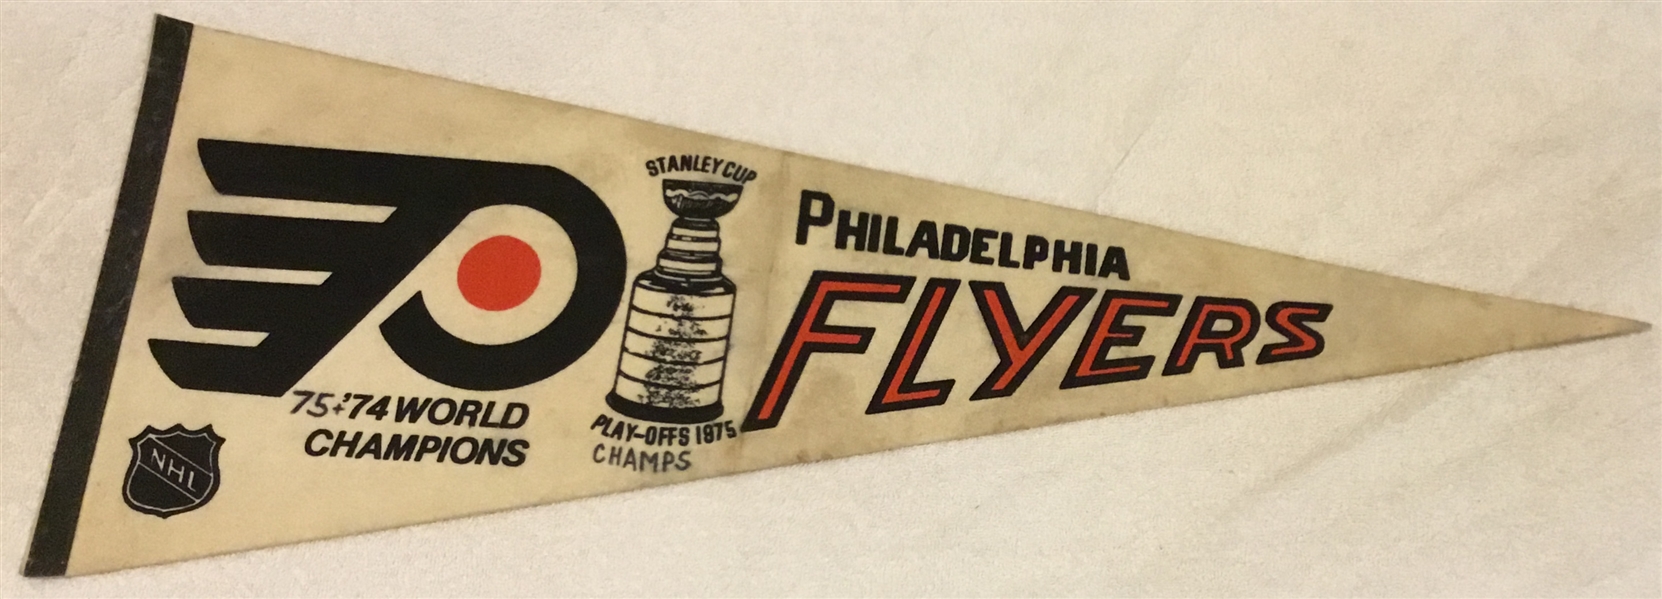 1975 PHILADELPHIA FLYERS STANLEY CUP PLAY-OFFS PENNANT